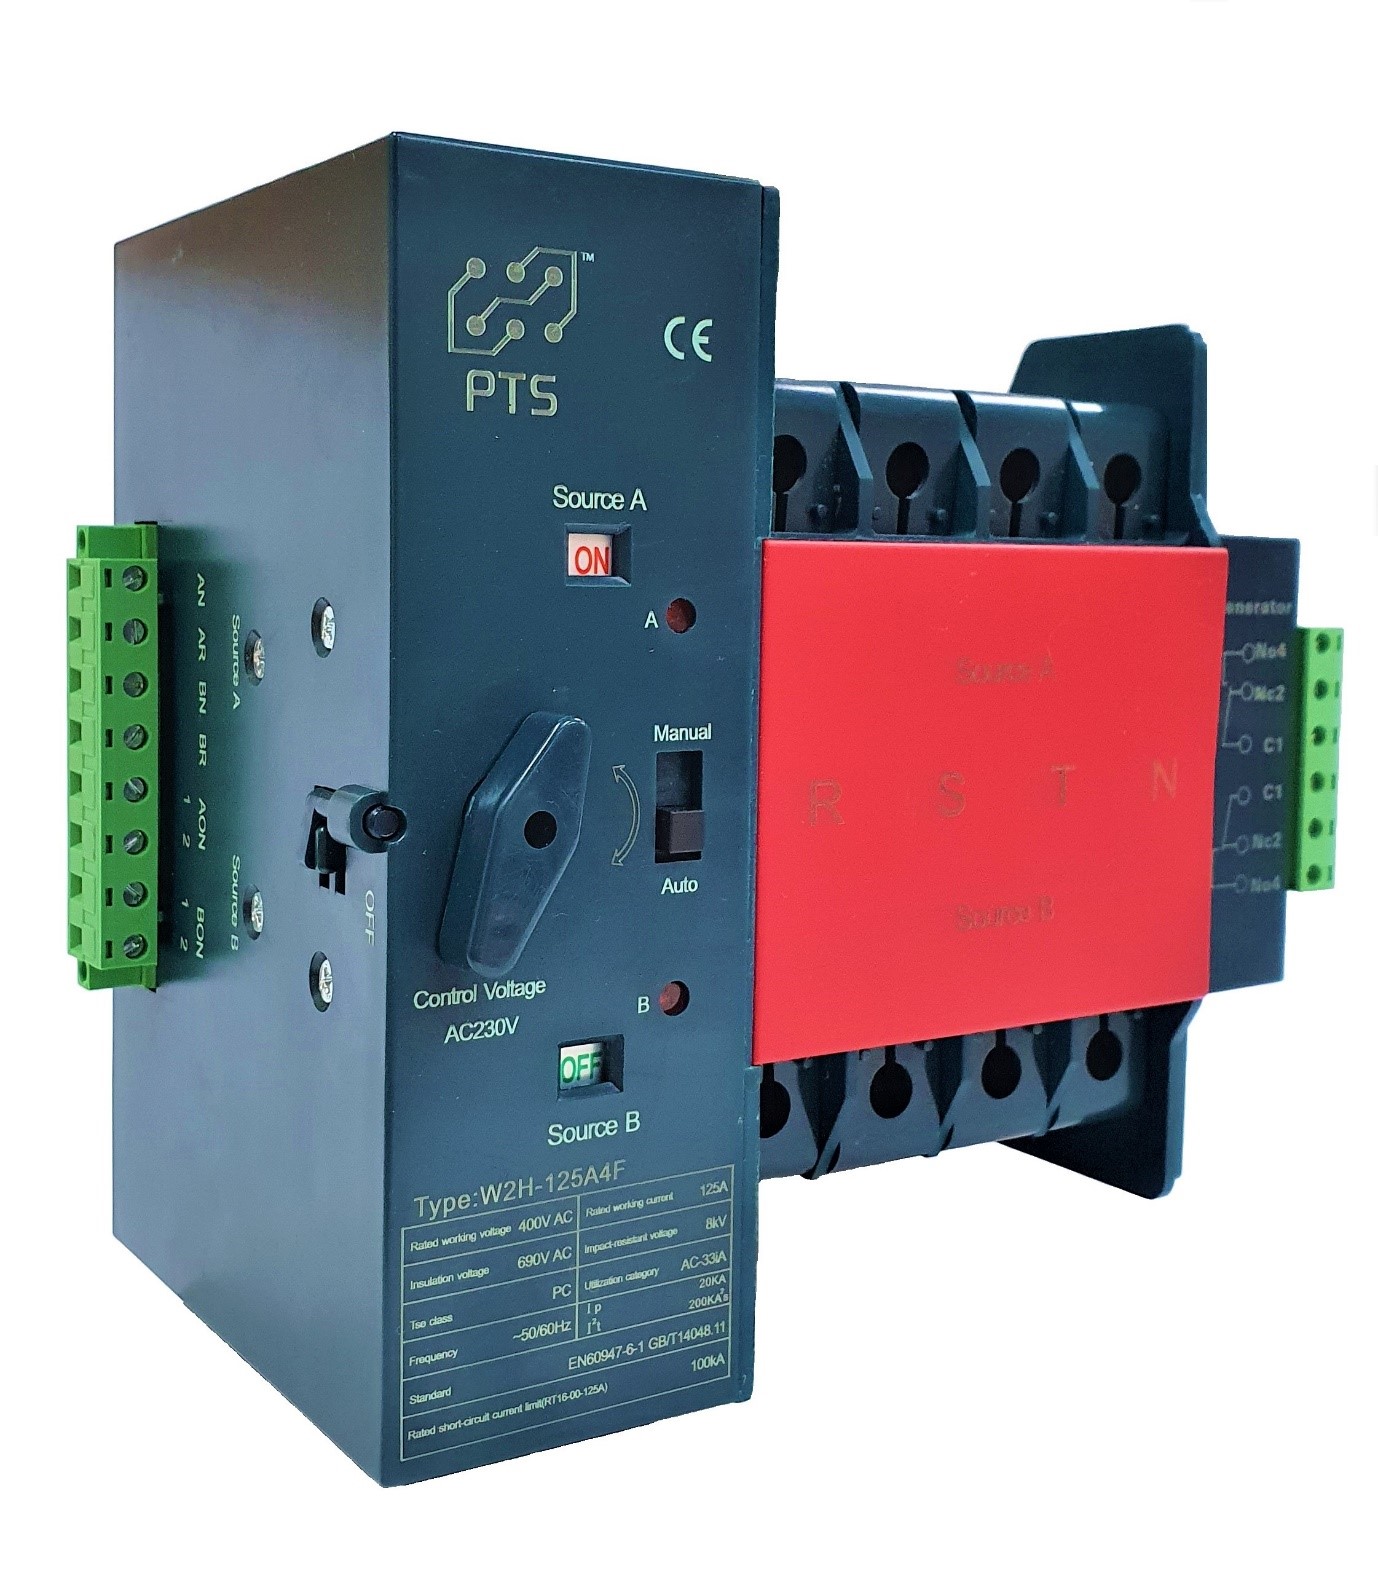 PTS Low-Voltage (LV) Automatic Transfer Switches